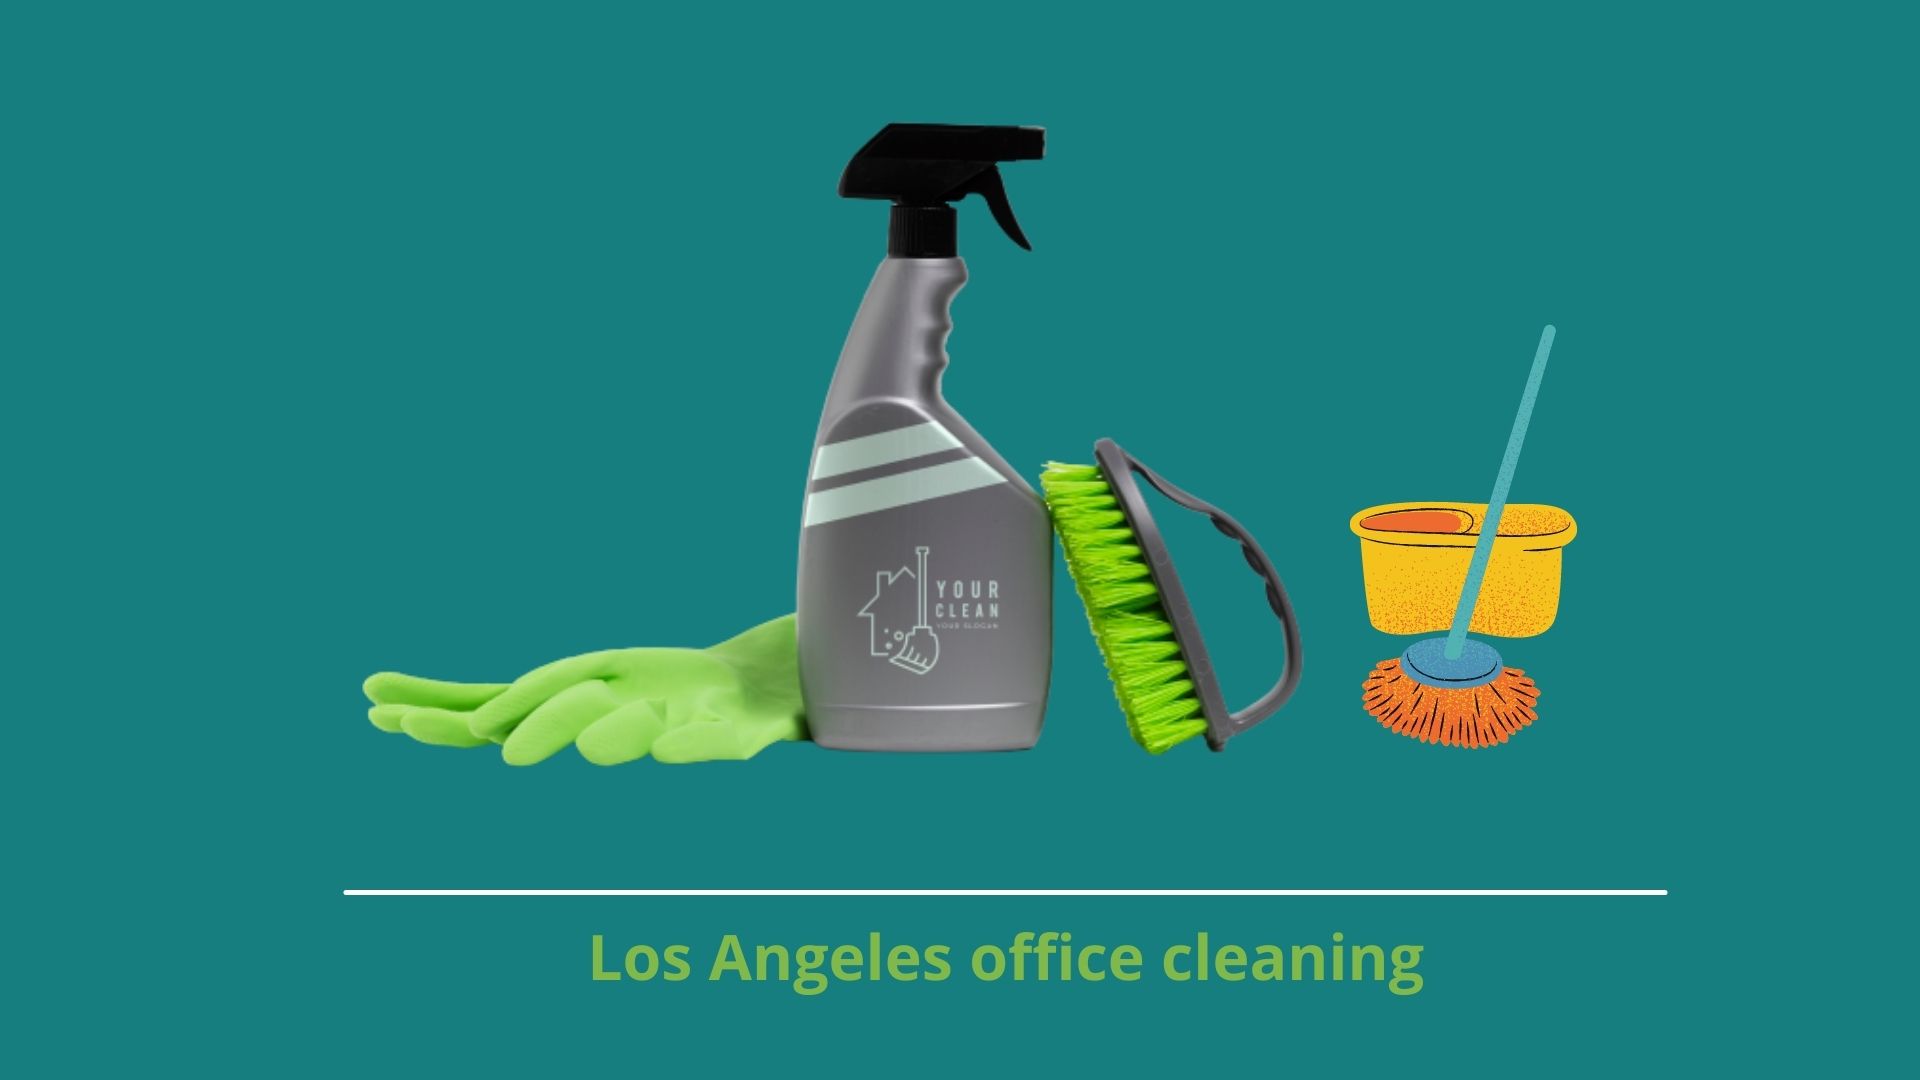 Los Angeles Office Cleaning: Expert Cleaners Addressing the Cleanliness